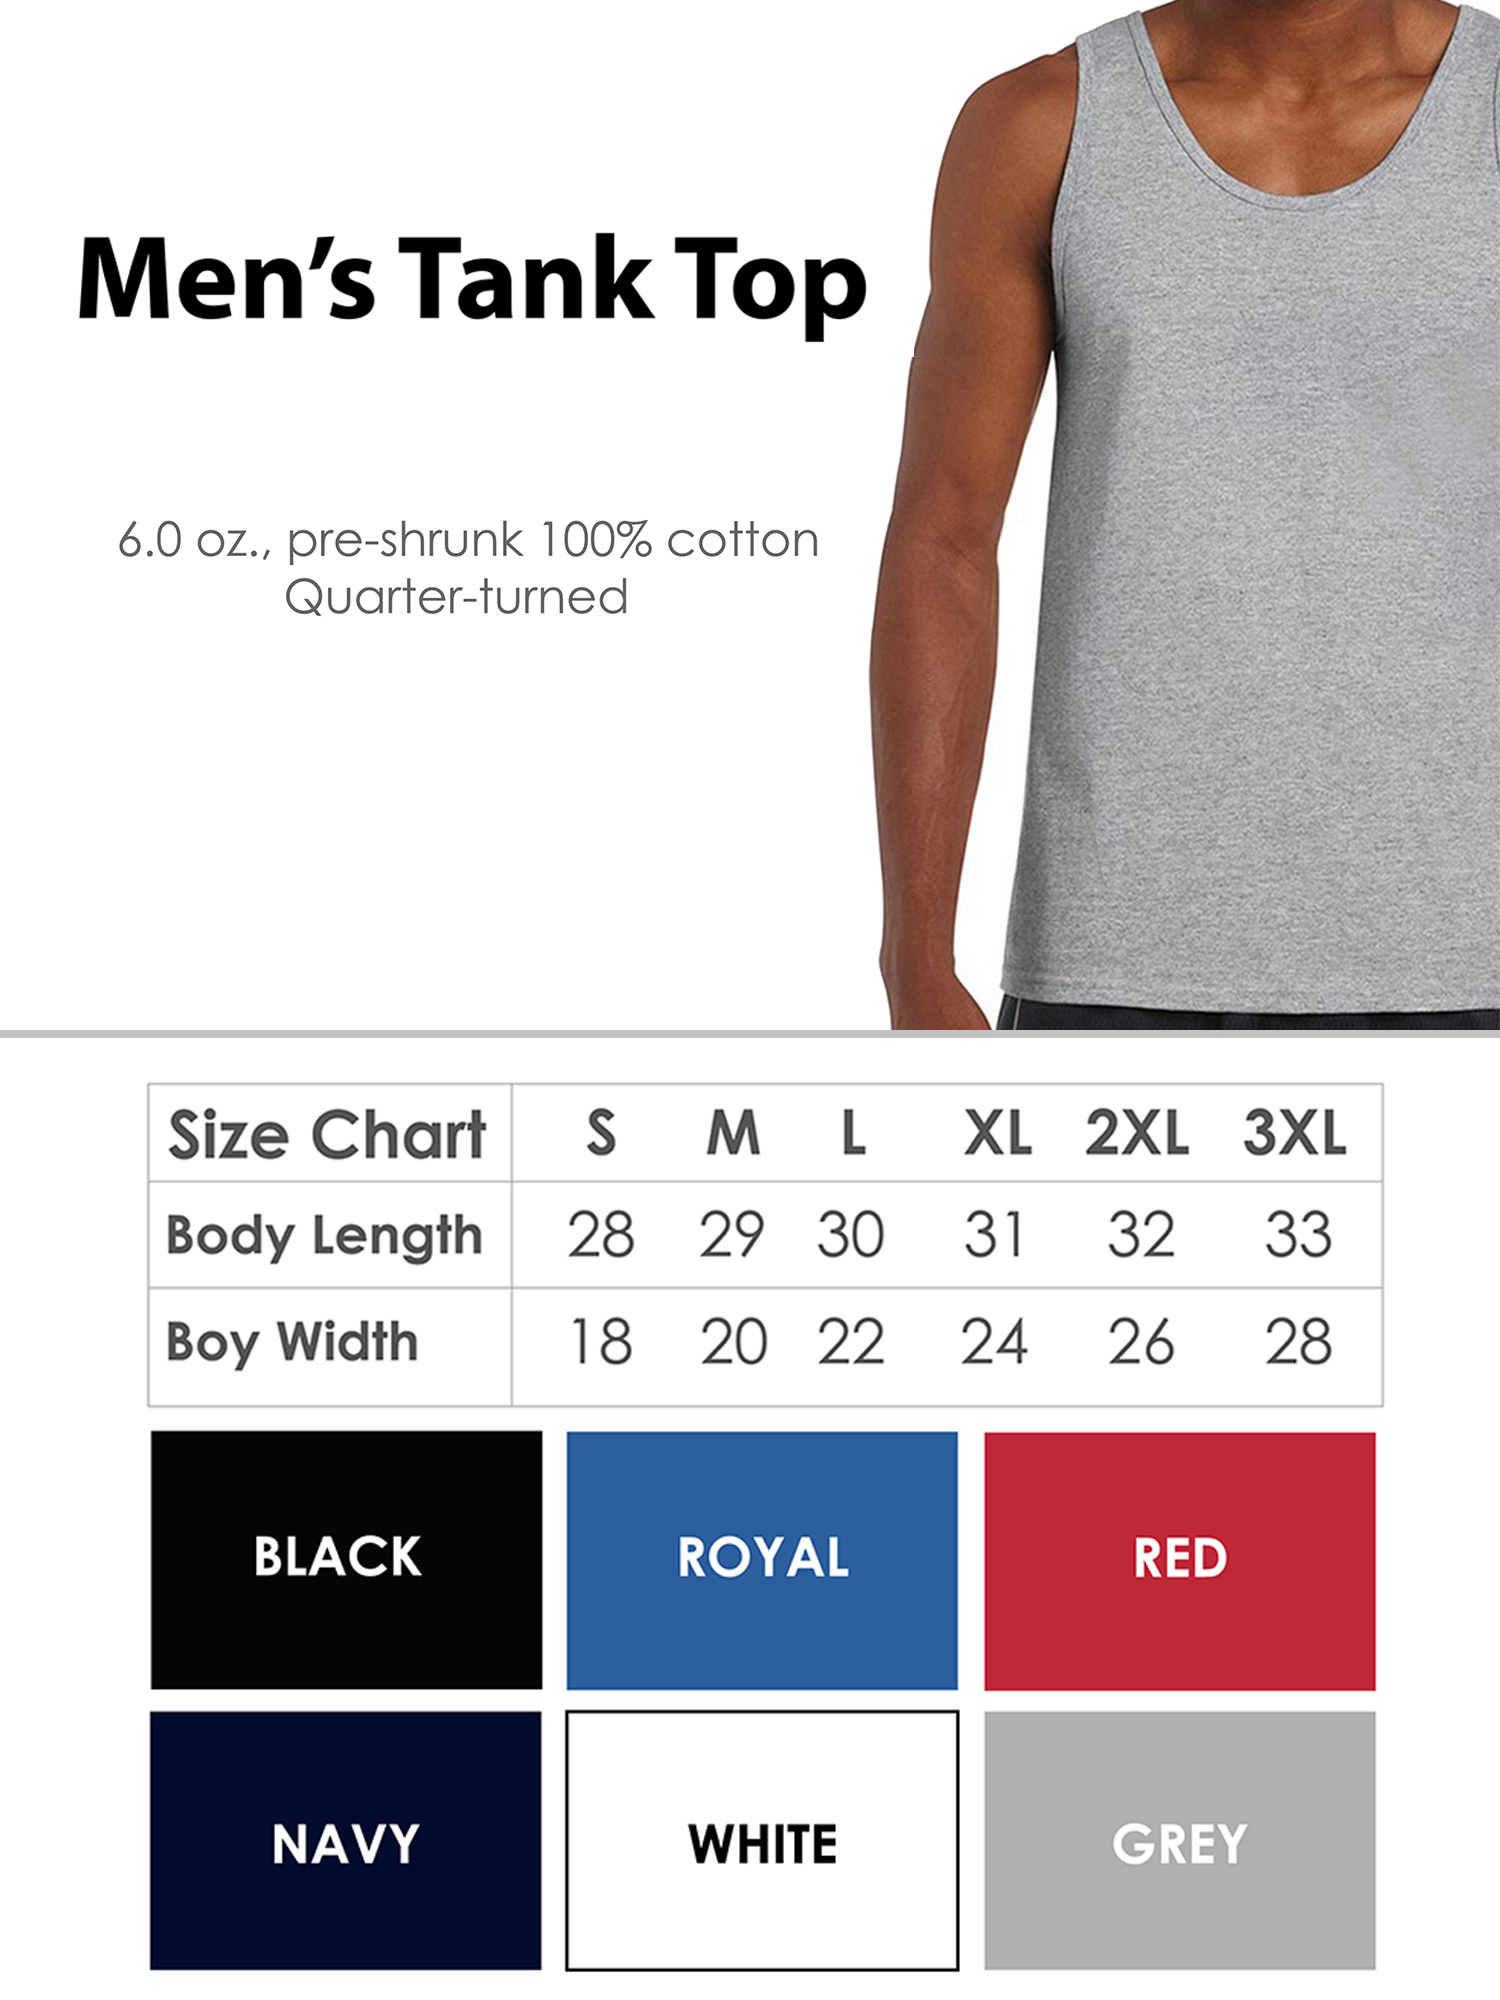 Awkward Styles Hiking Lovers Clothes Take a Hike Tank Top for Men Hike Clothes Sport Outfit Men's Tank Tops Hike Outfit Men Shirts Outdoor Clothing for Men Cute Hiking T Shirt for Boyfriend - image 4 of 4